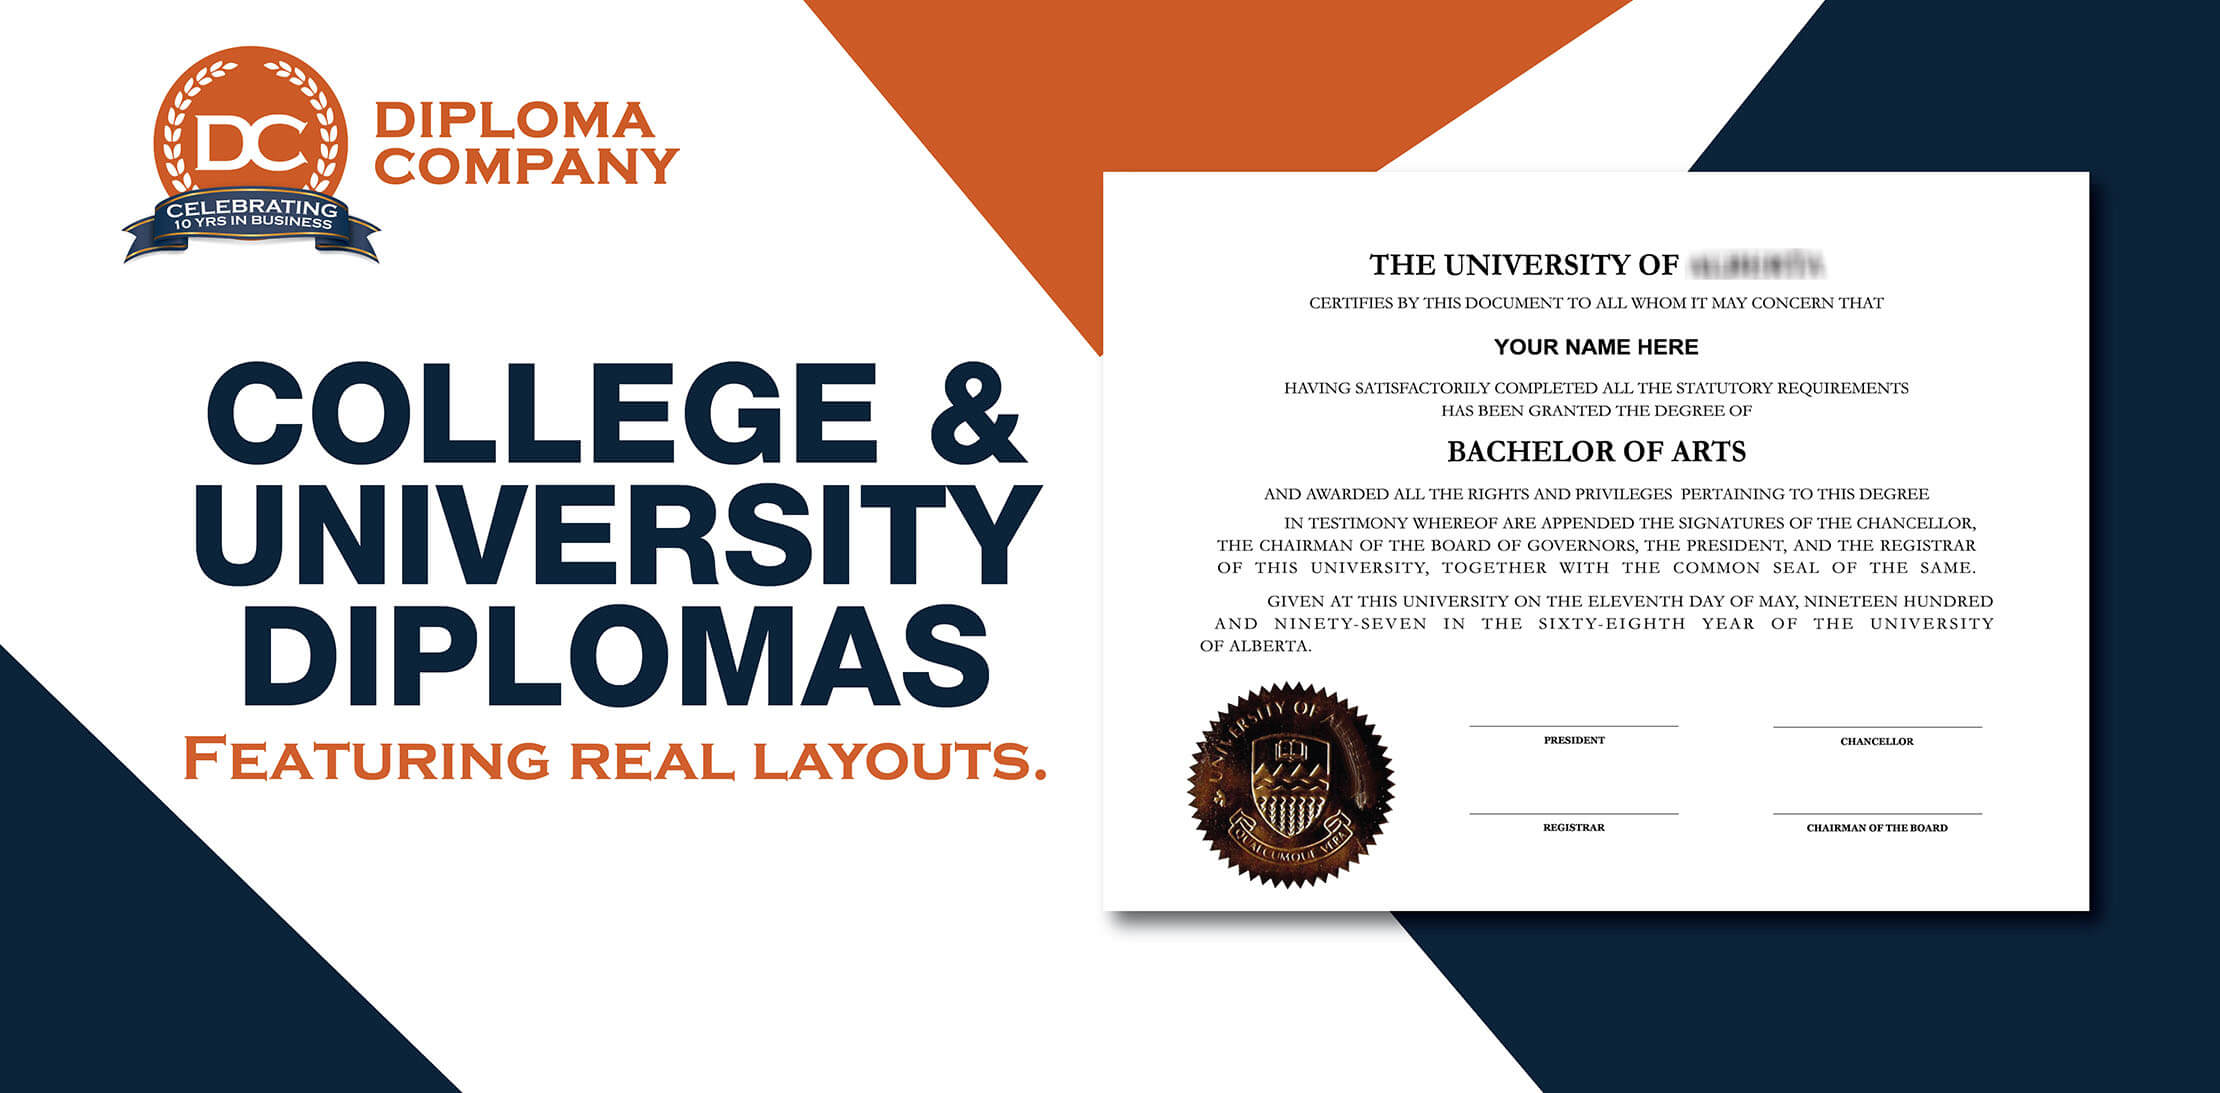 Fake college diplomas featuring realistic university layouts! 100% match! Shiny gold embossed seals! Satisfaction guaranteed!